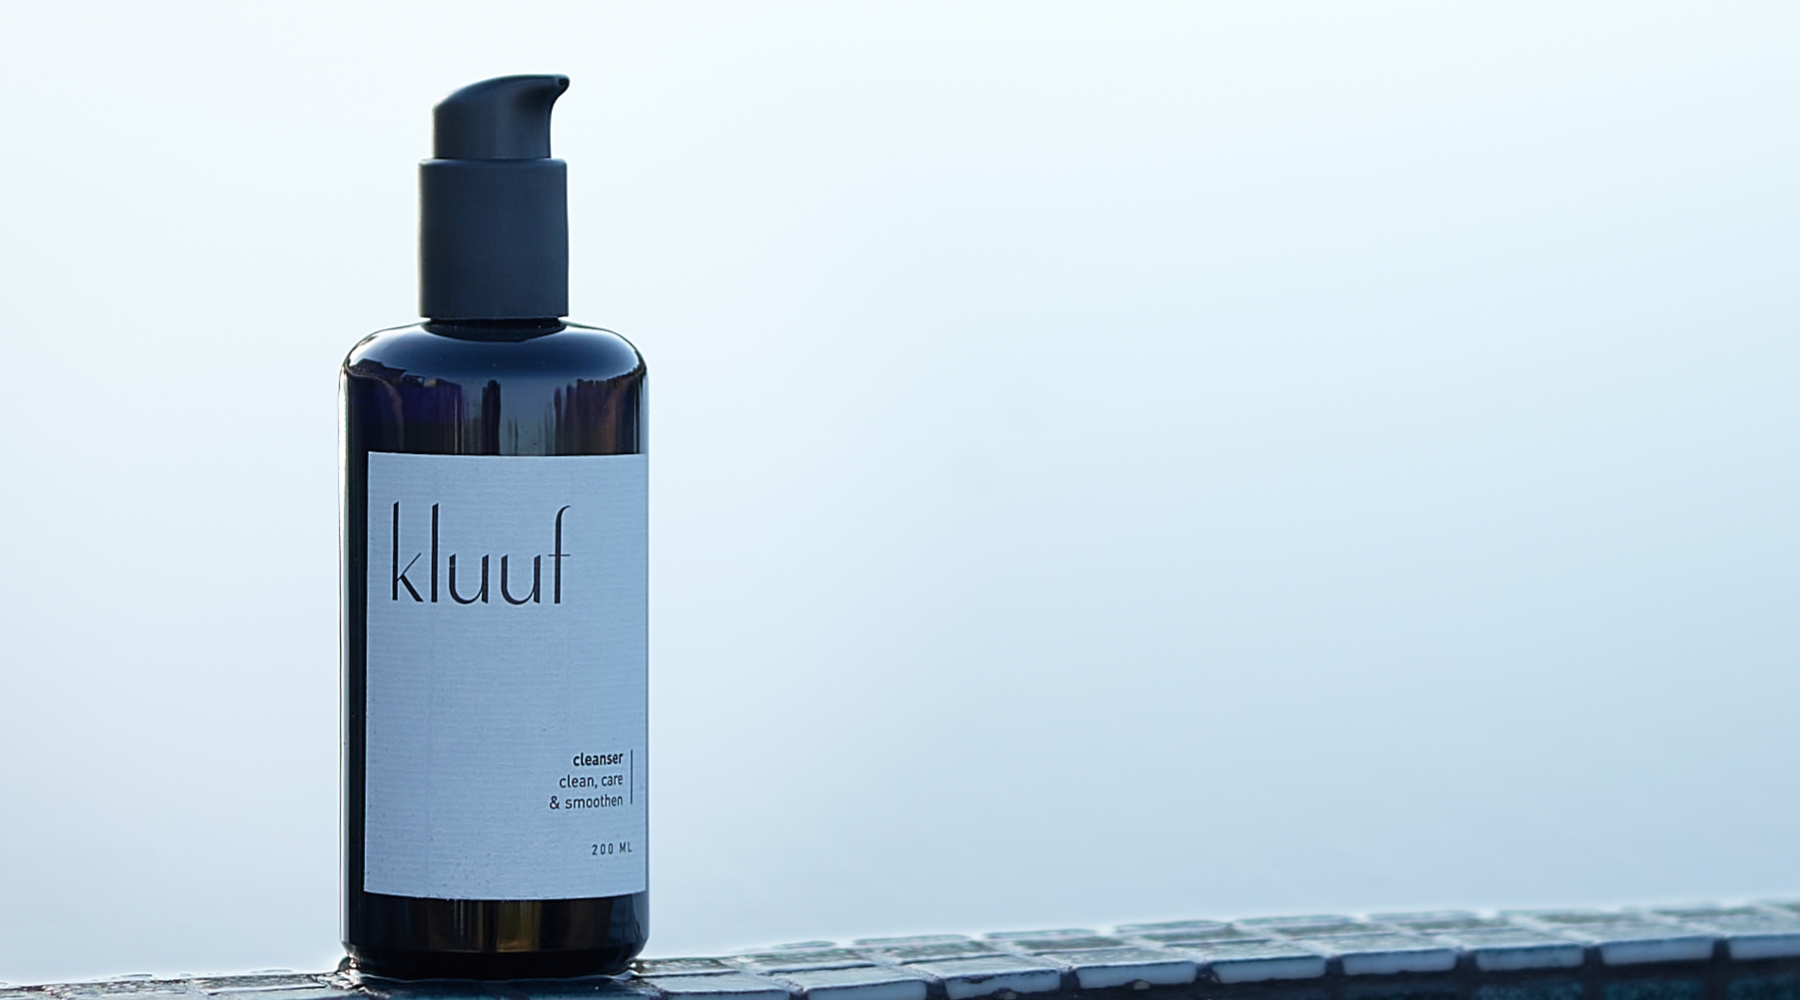 Kluuf's gentle facial cleanser for men positioned on the edge of a pool, overlooking the water